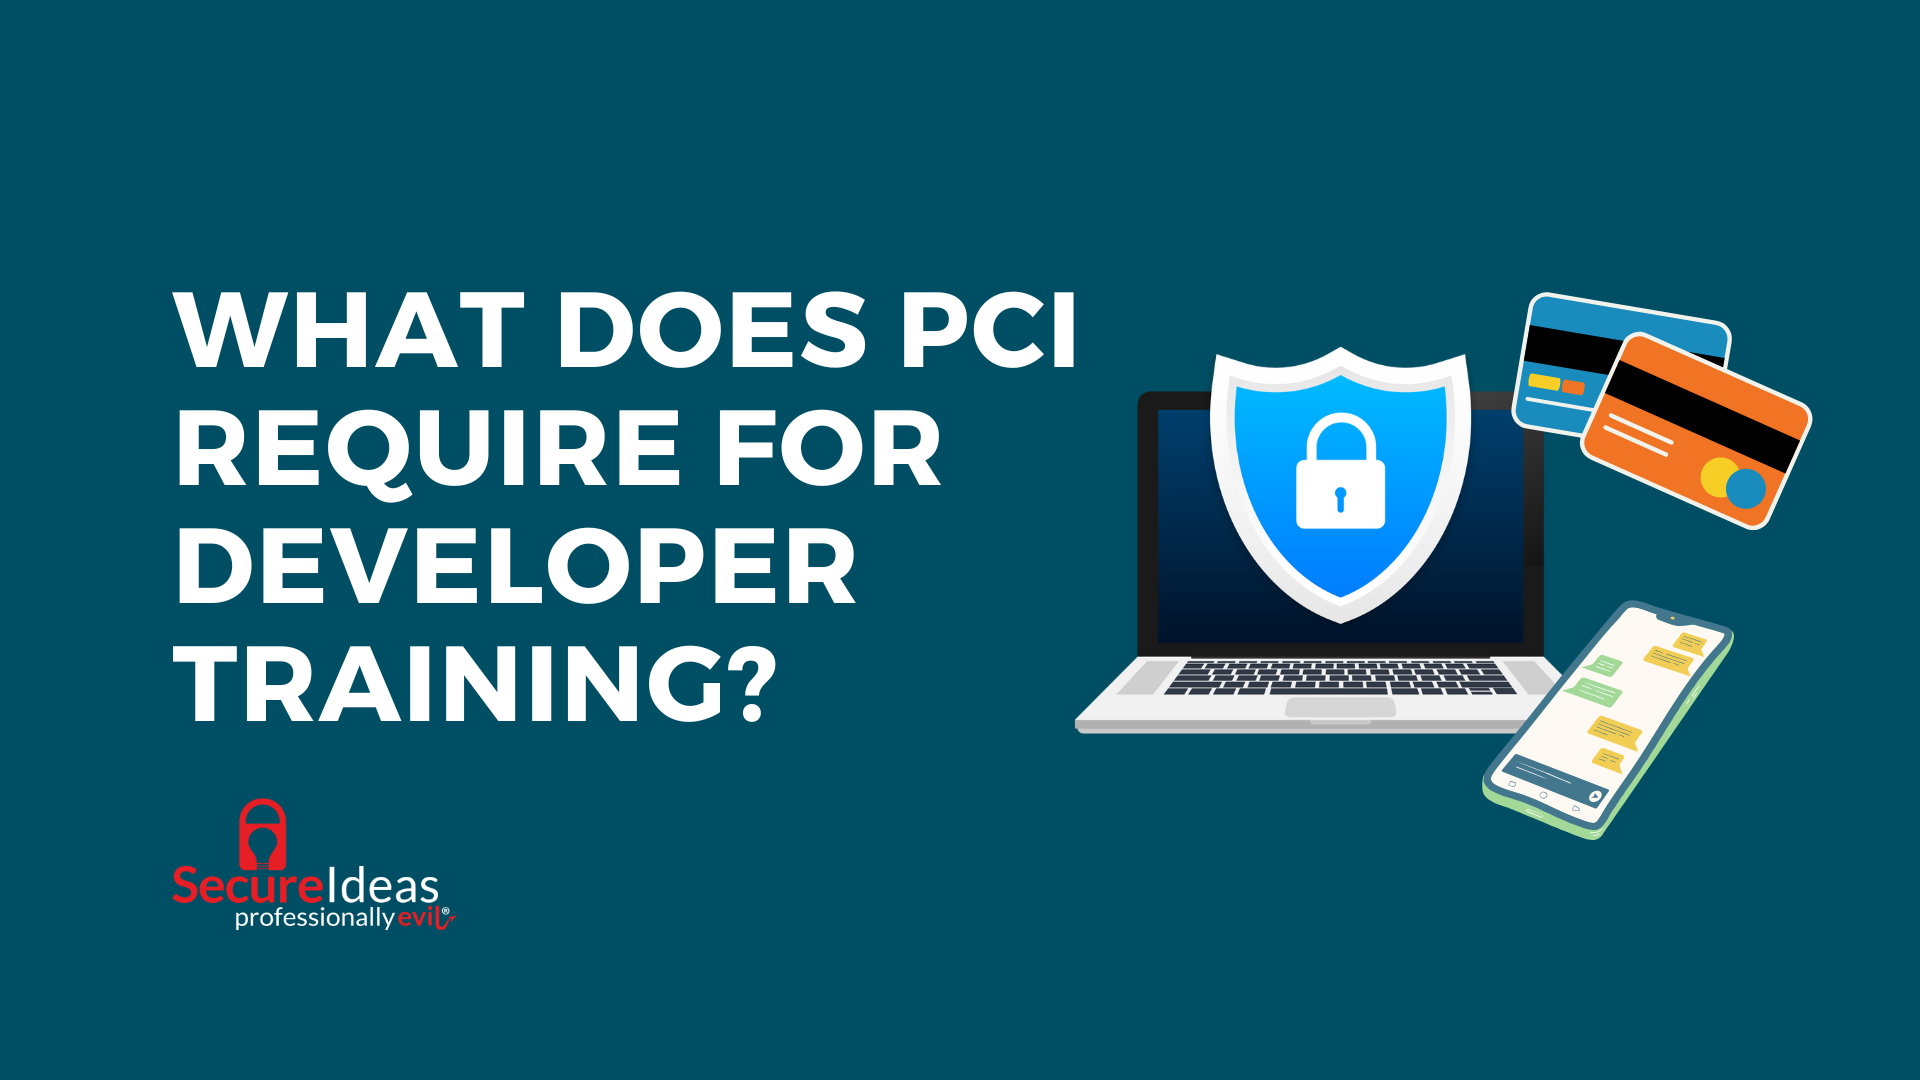 What does PCI require for Developer Training?